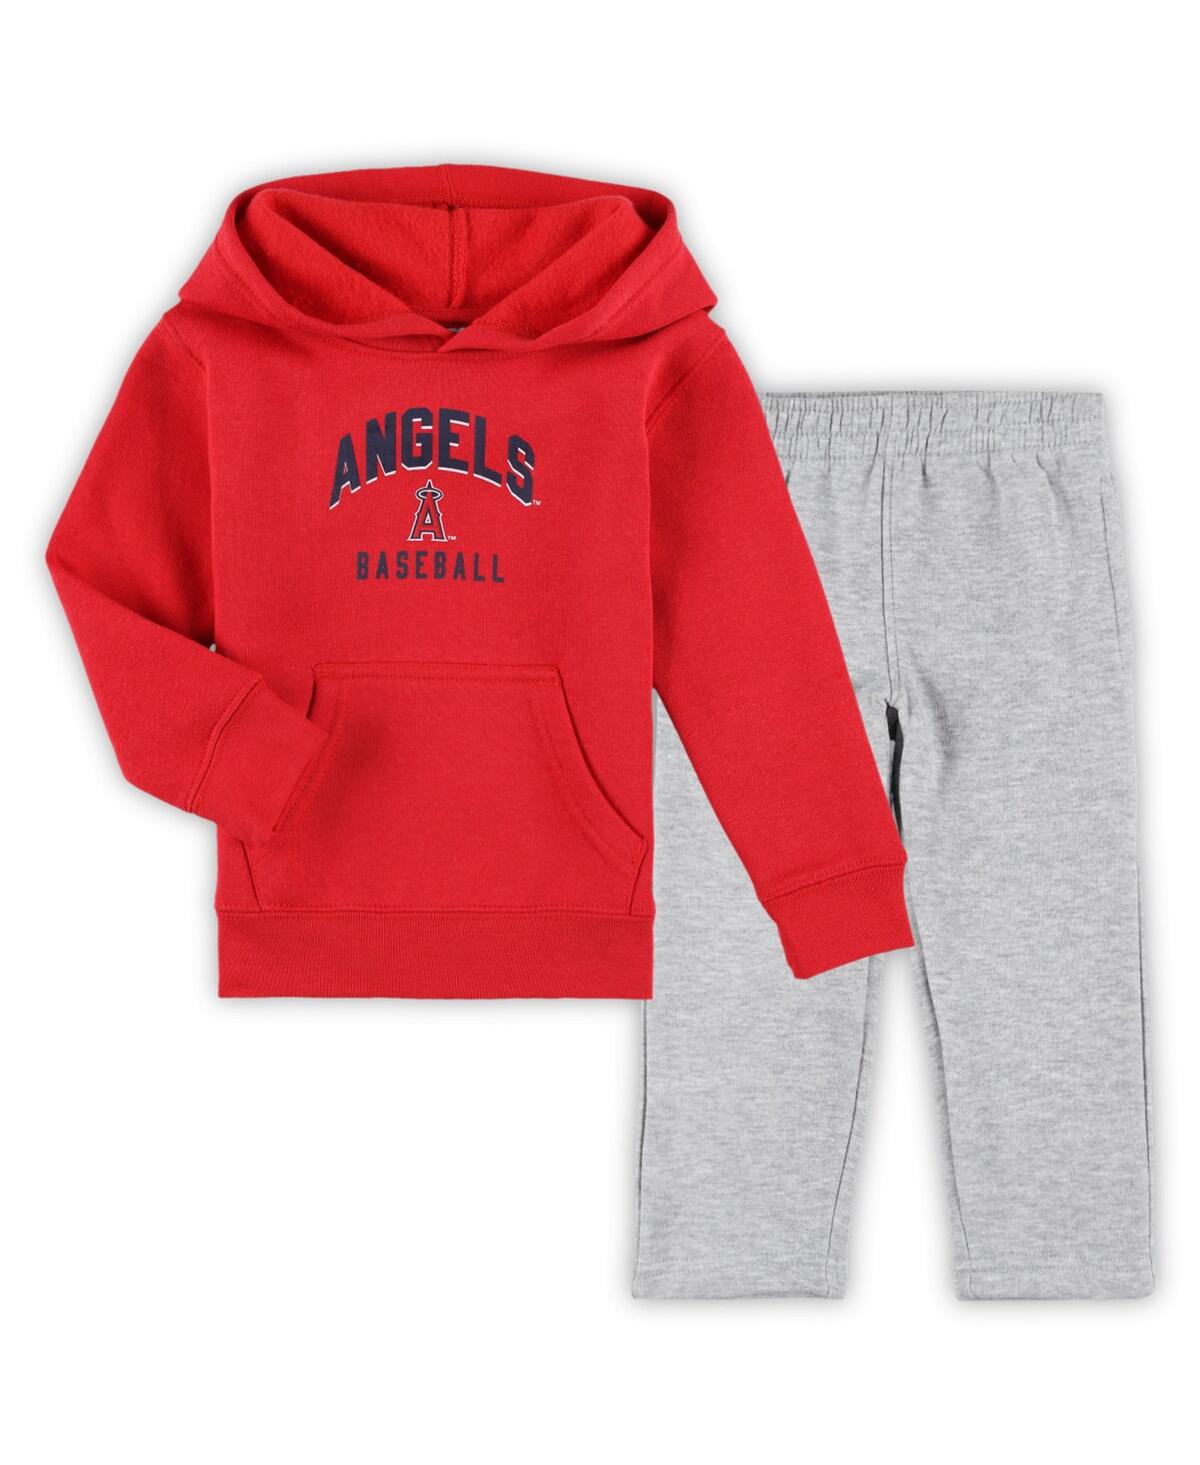 Outerstuff Babies' Toddler Boys And Girls Red, Gray Los Angeles Angels Play-by-play Pullover Fleece Hoodie And Pants Se In Red,gray